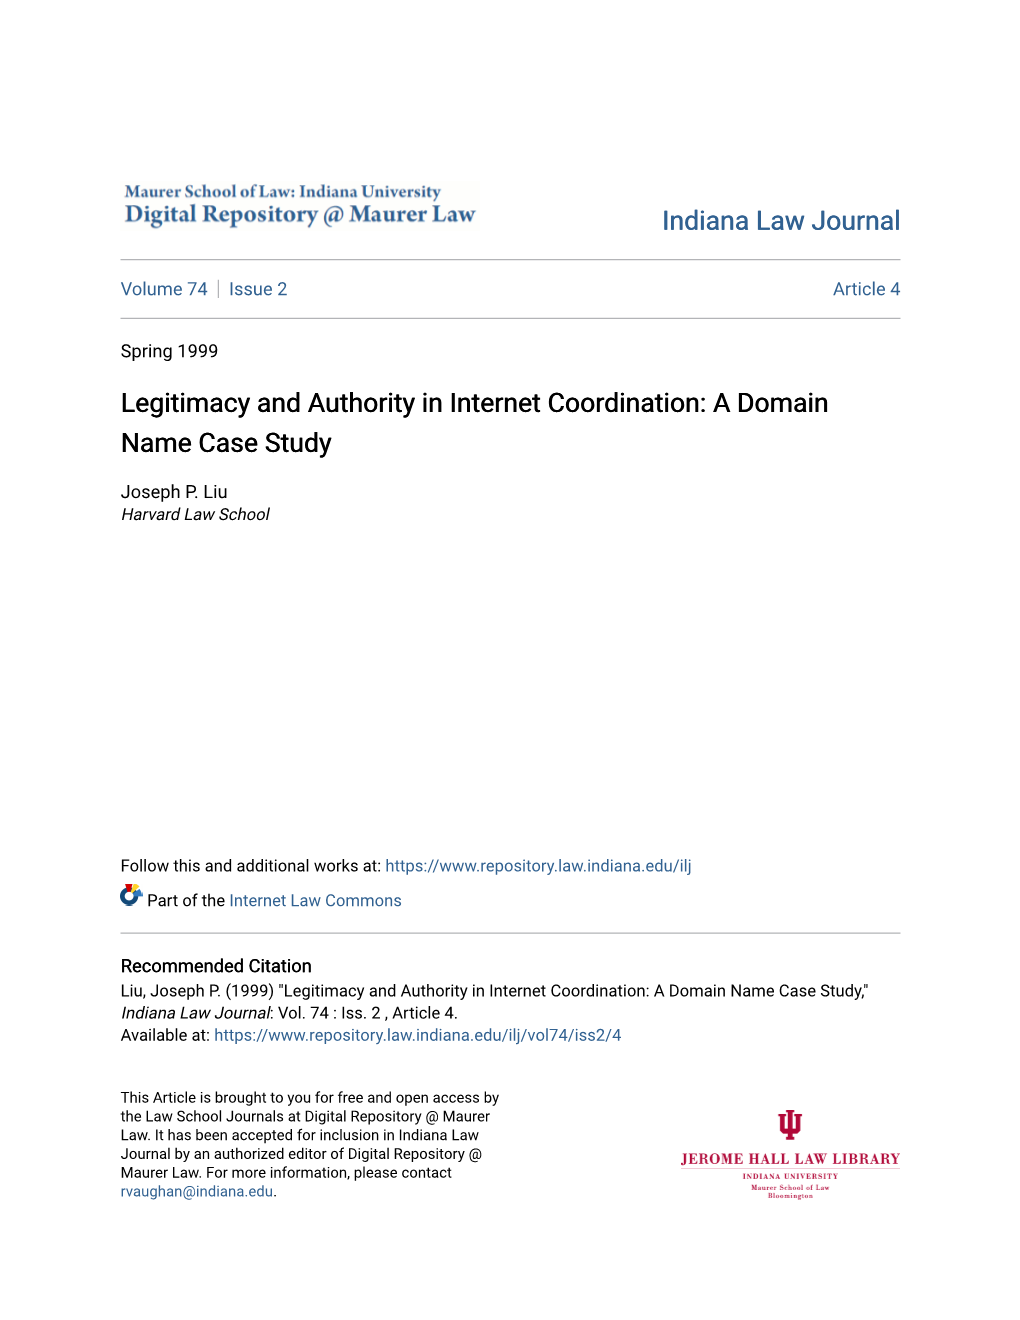 Legitimacy and Authority in Internet Coordination: a Domain Name Case Study